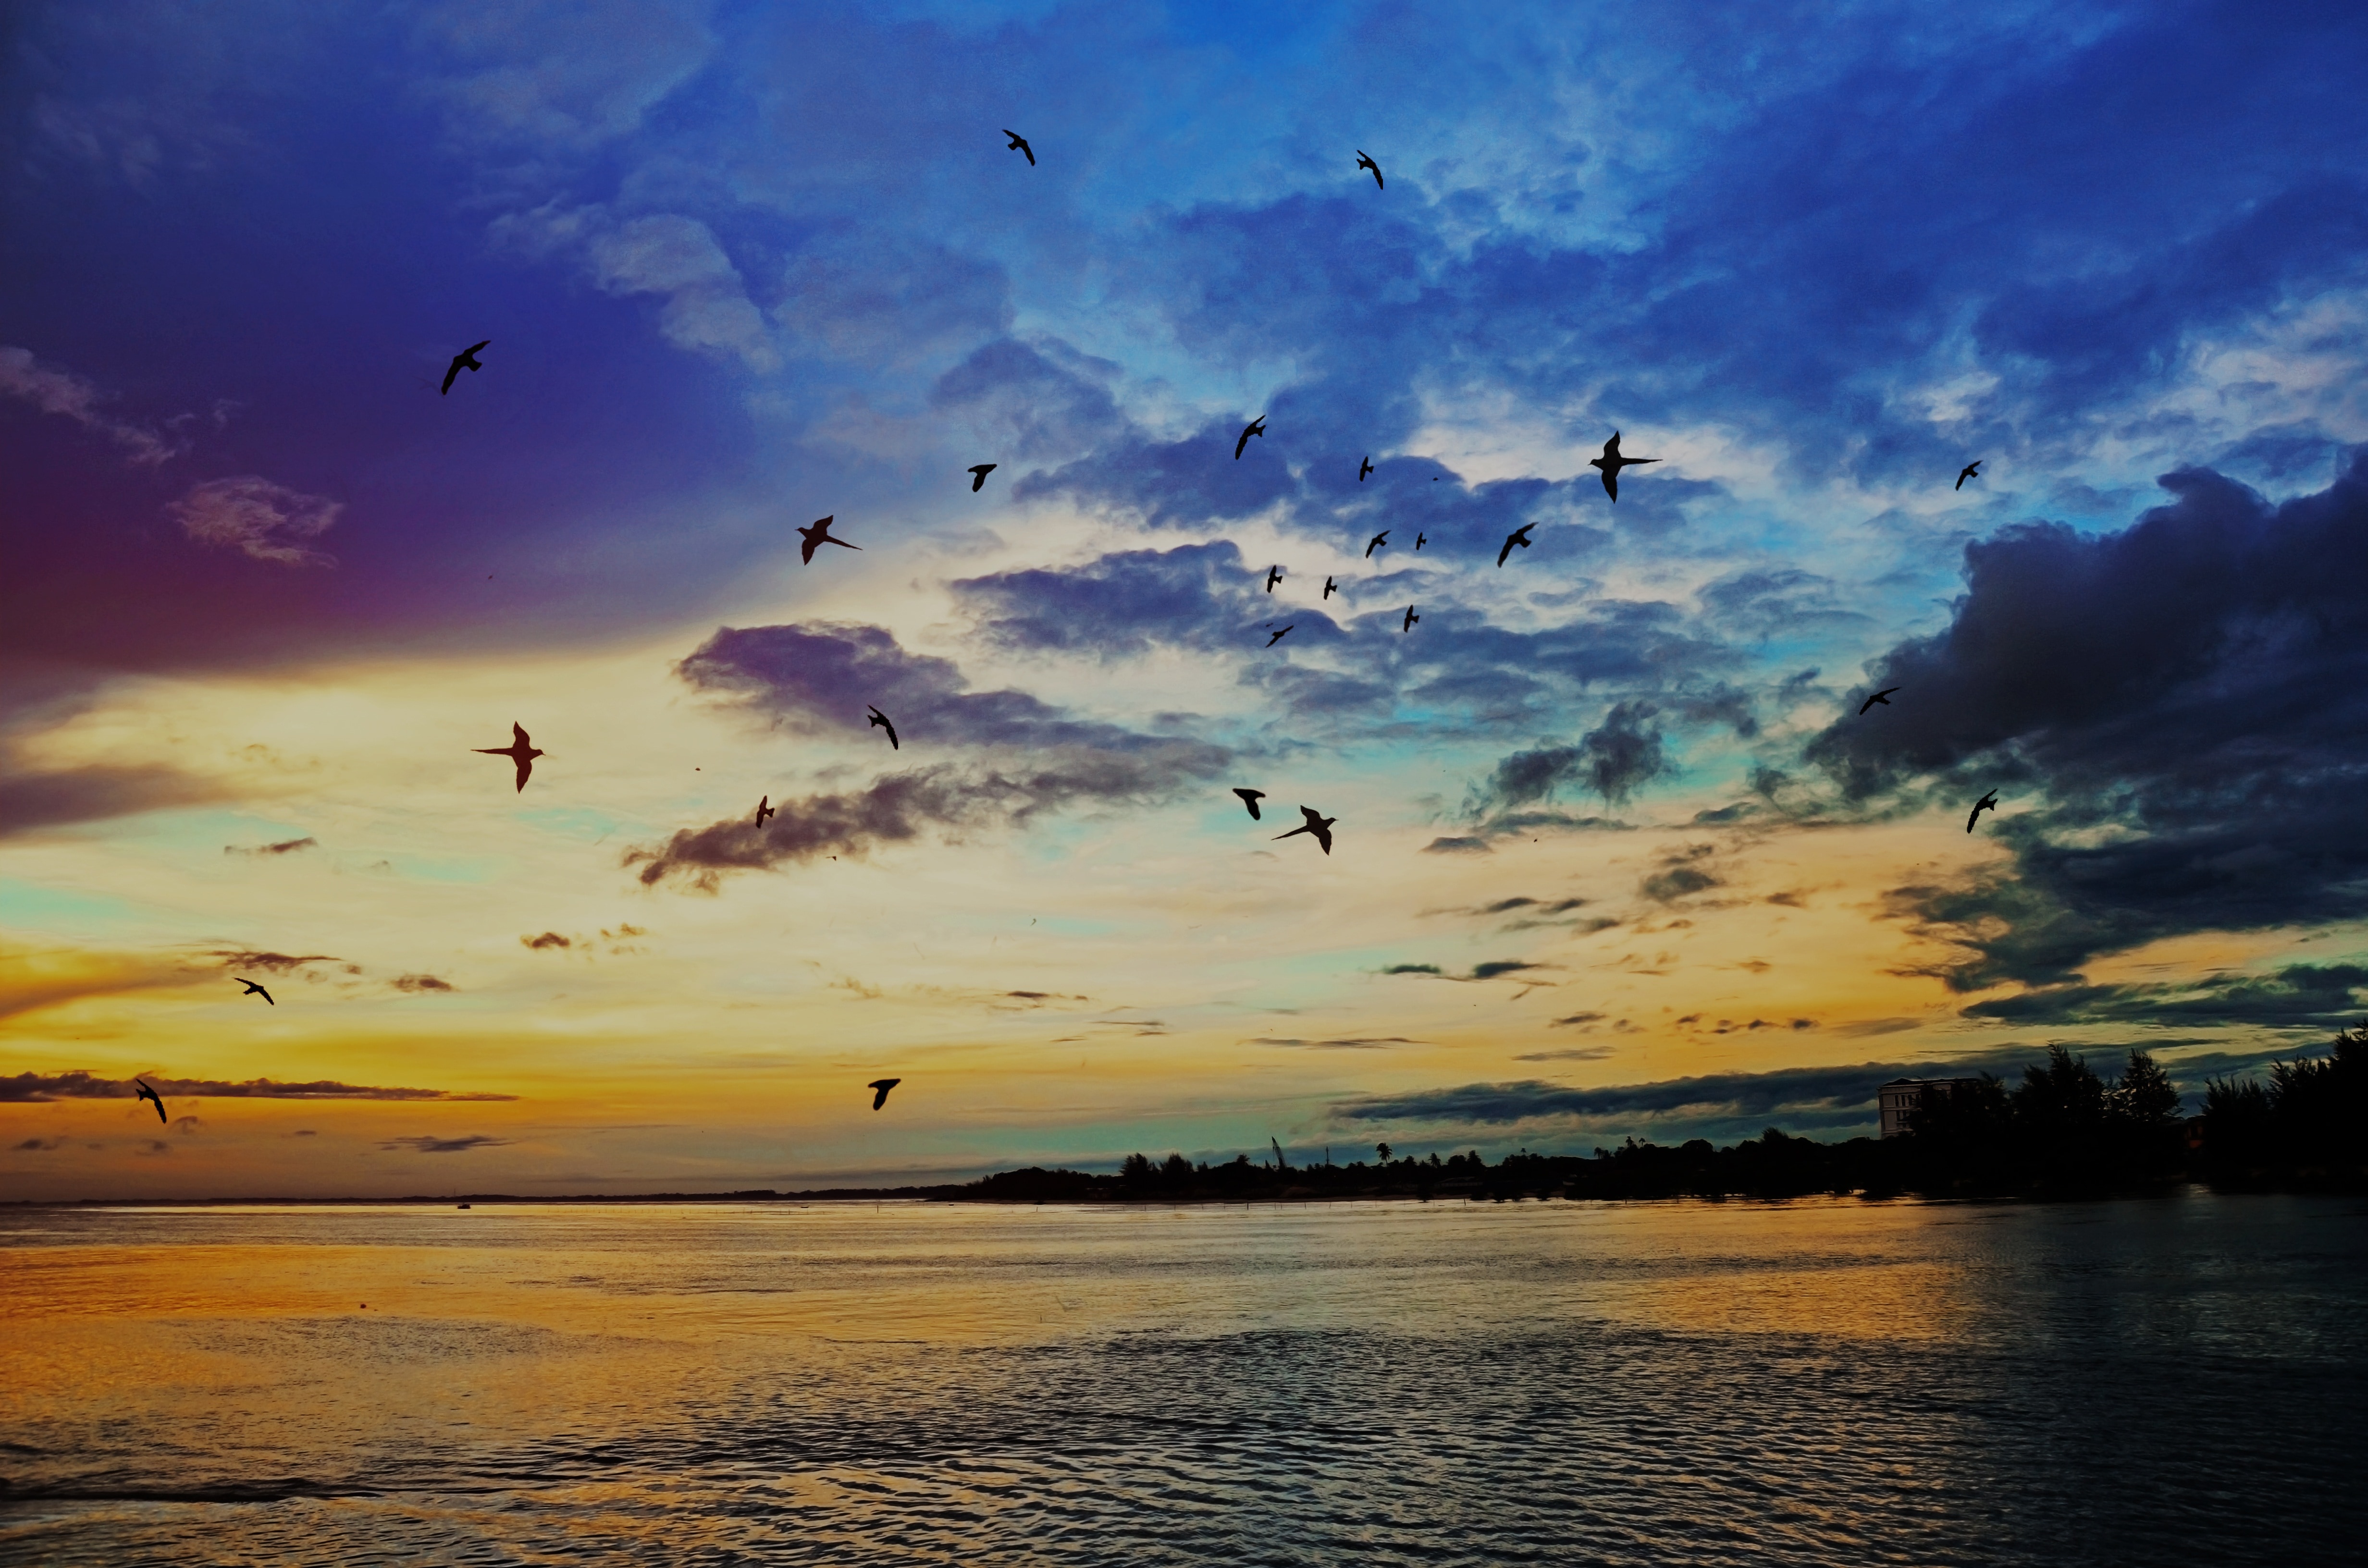 photography of sunset near body of water and flock of birds